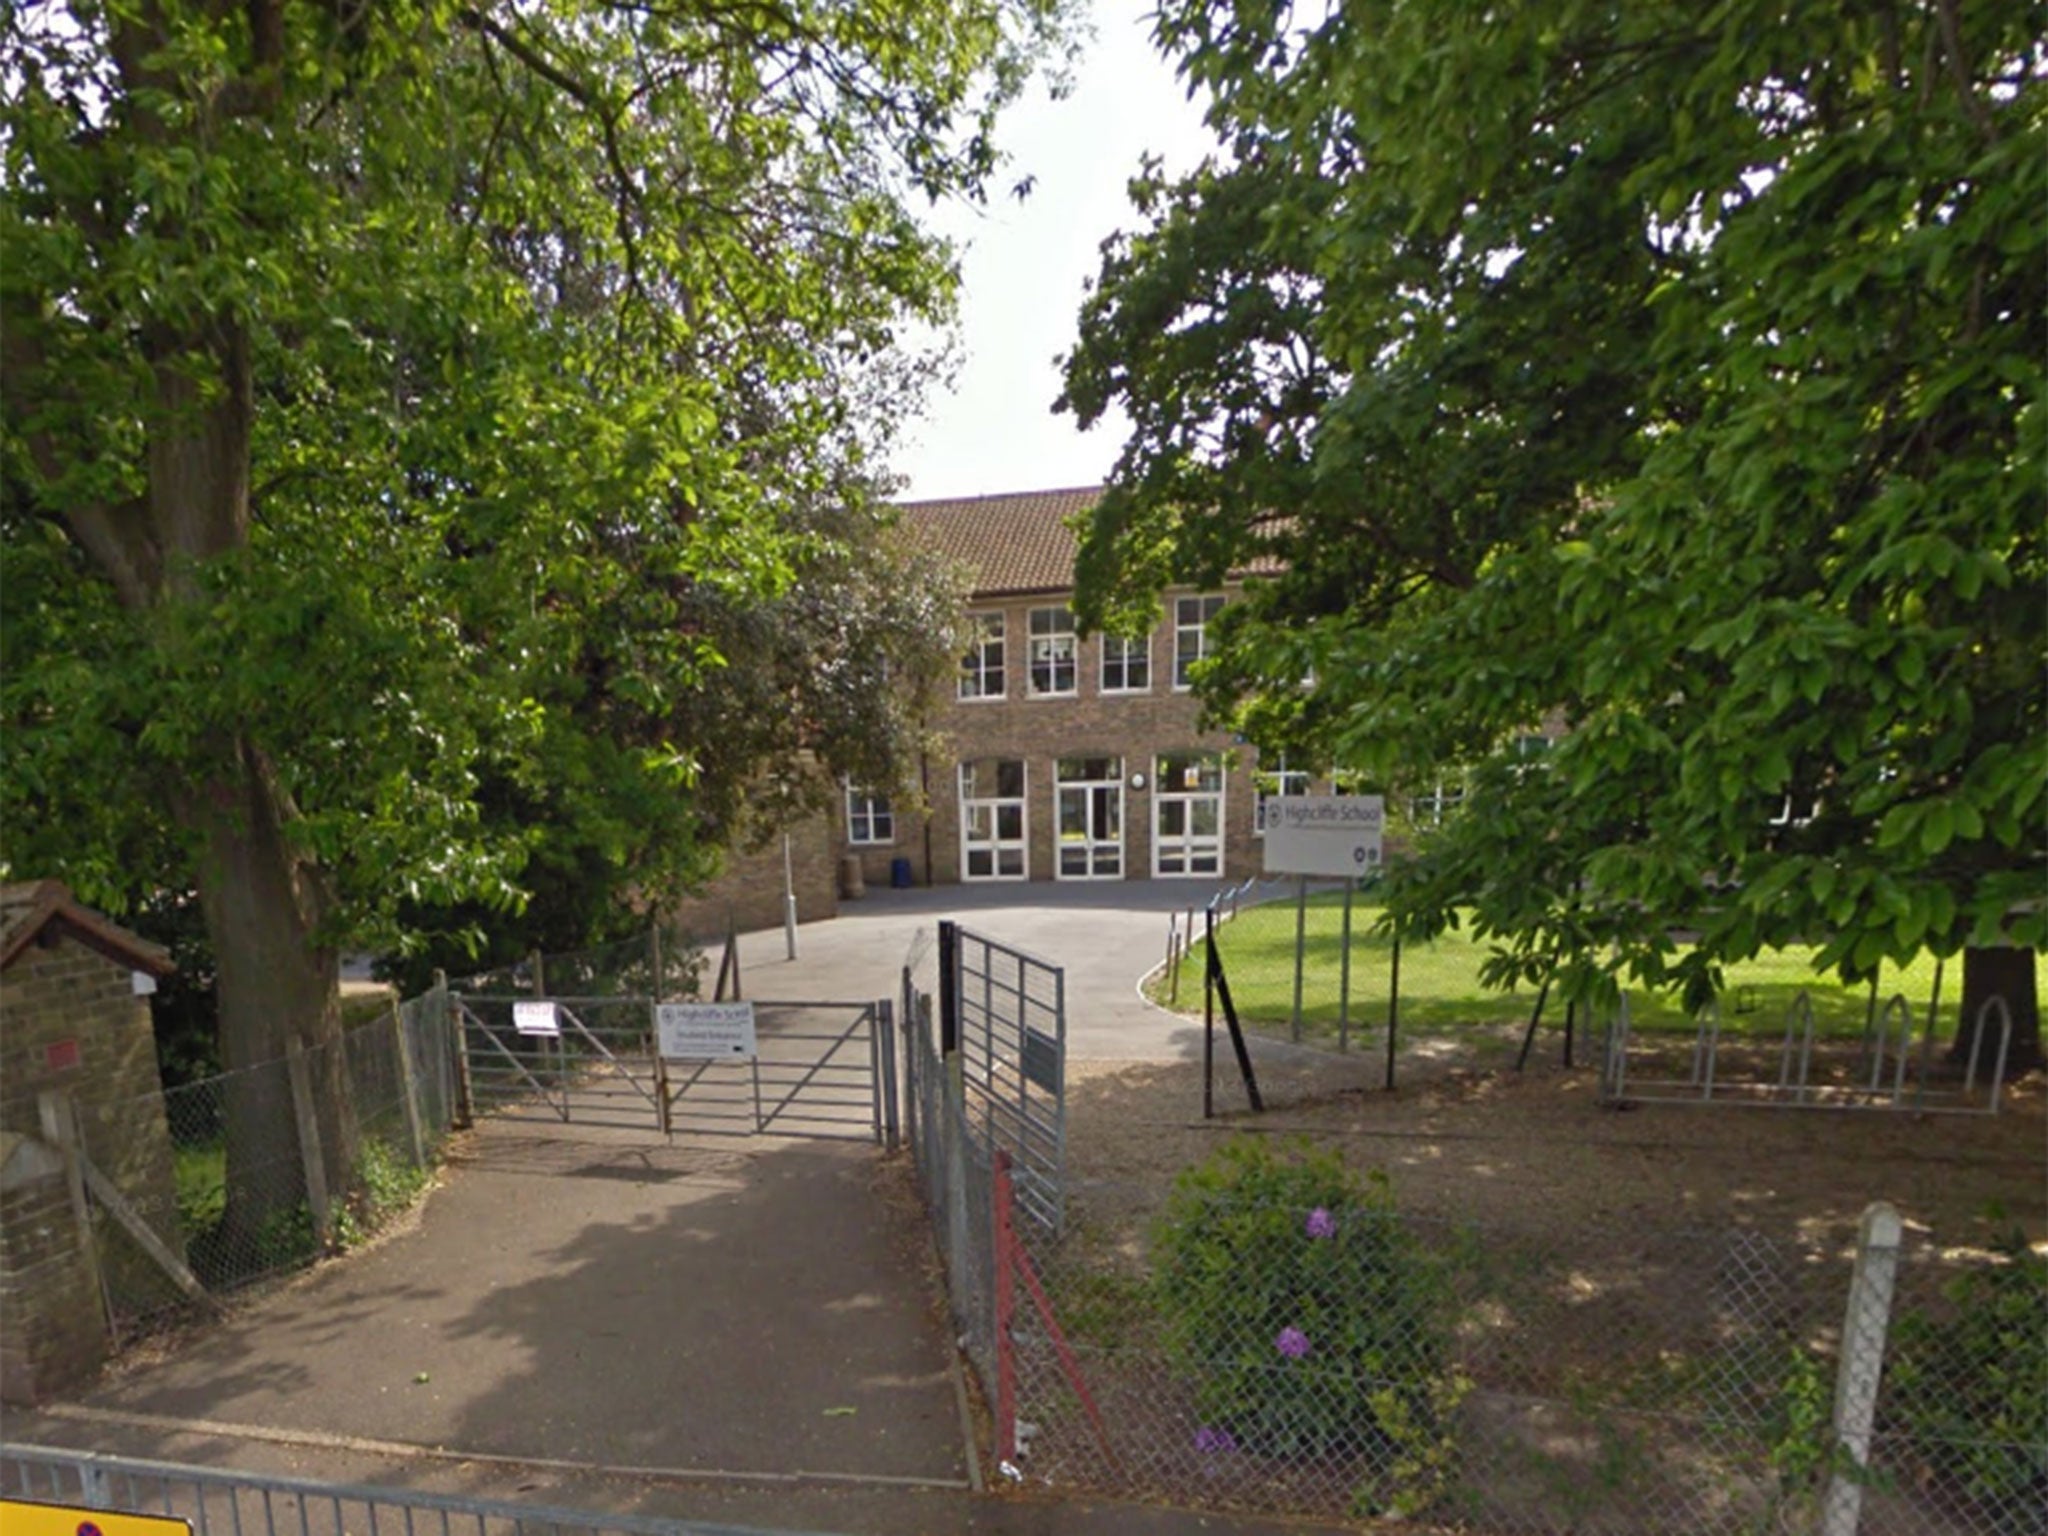 Highcliffe School in Bournemouth, which was put on lockdown over reports of shots fired at maintenance staff